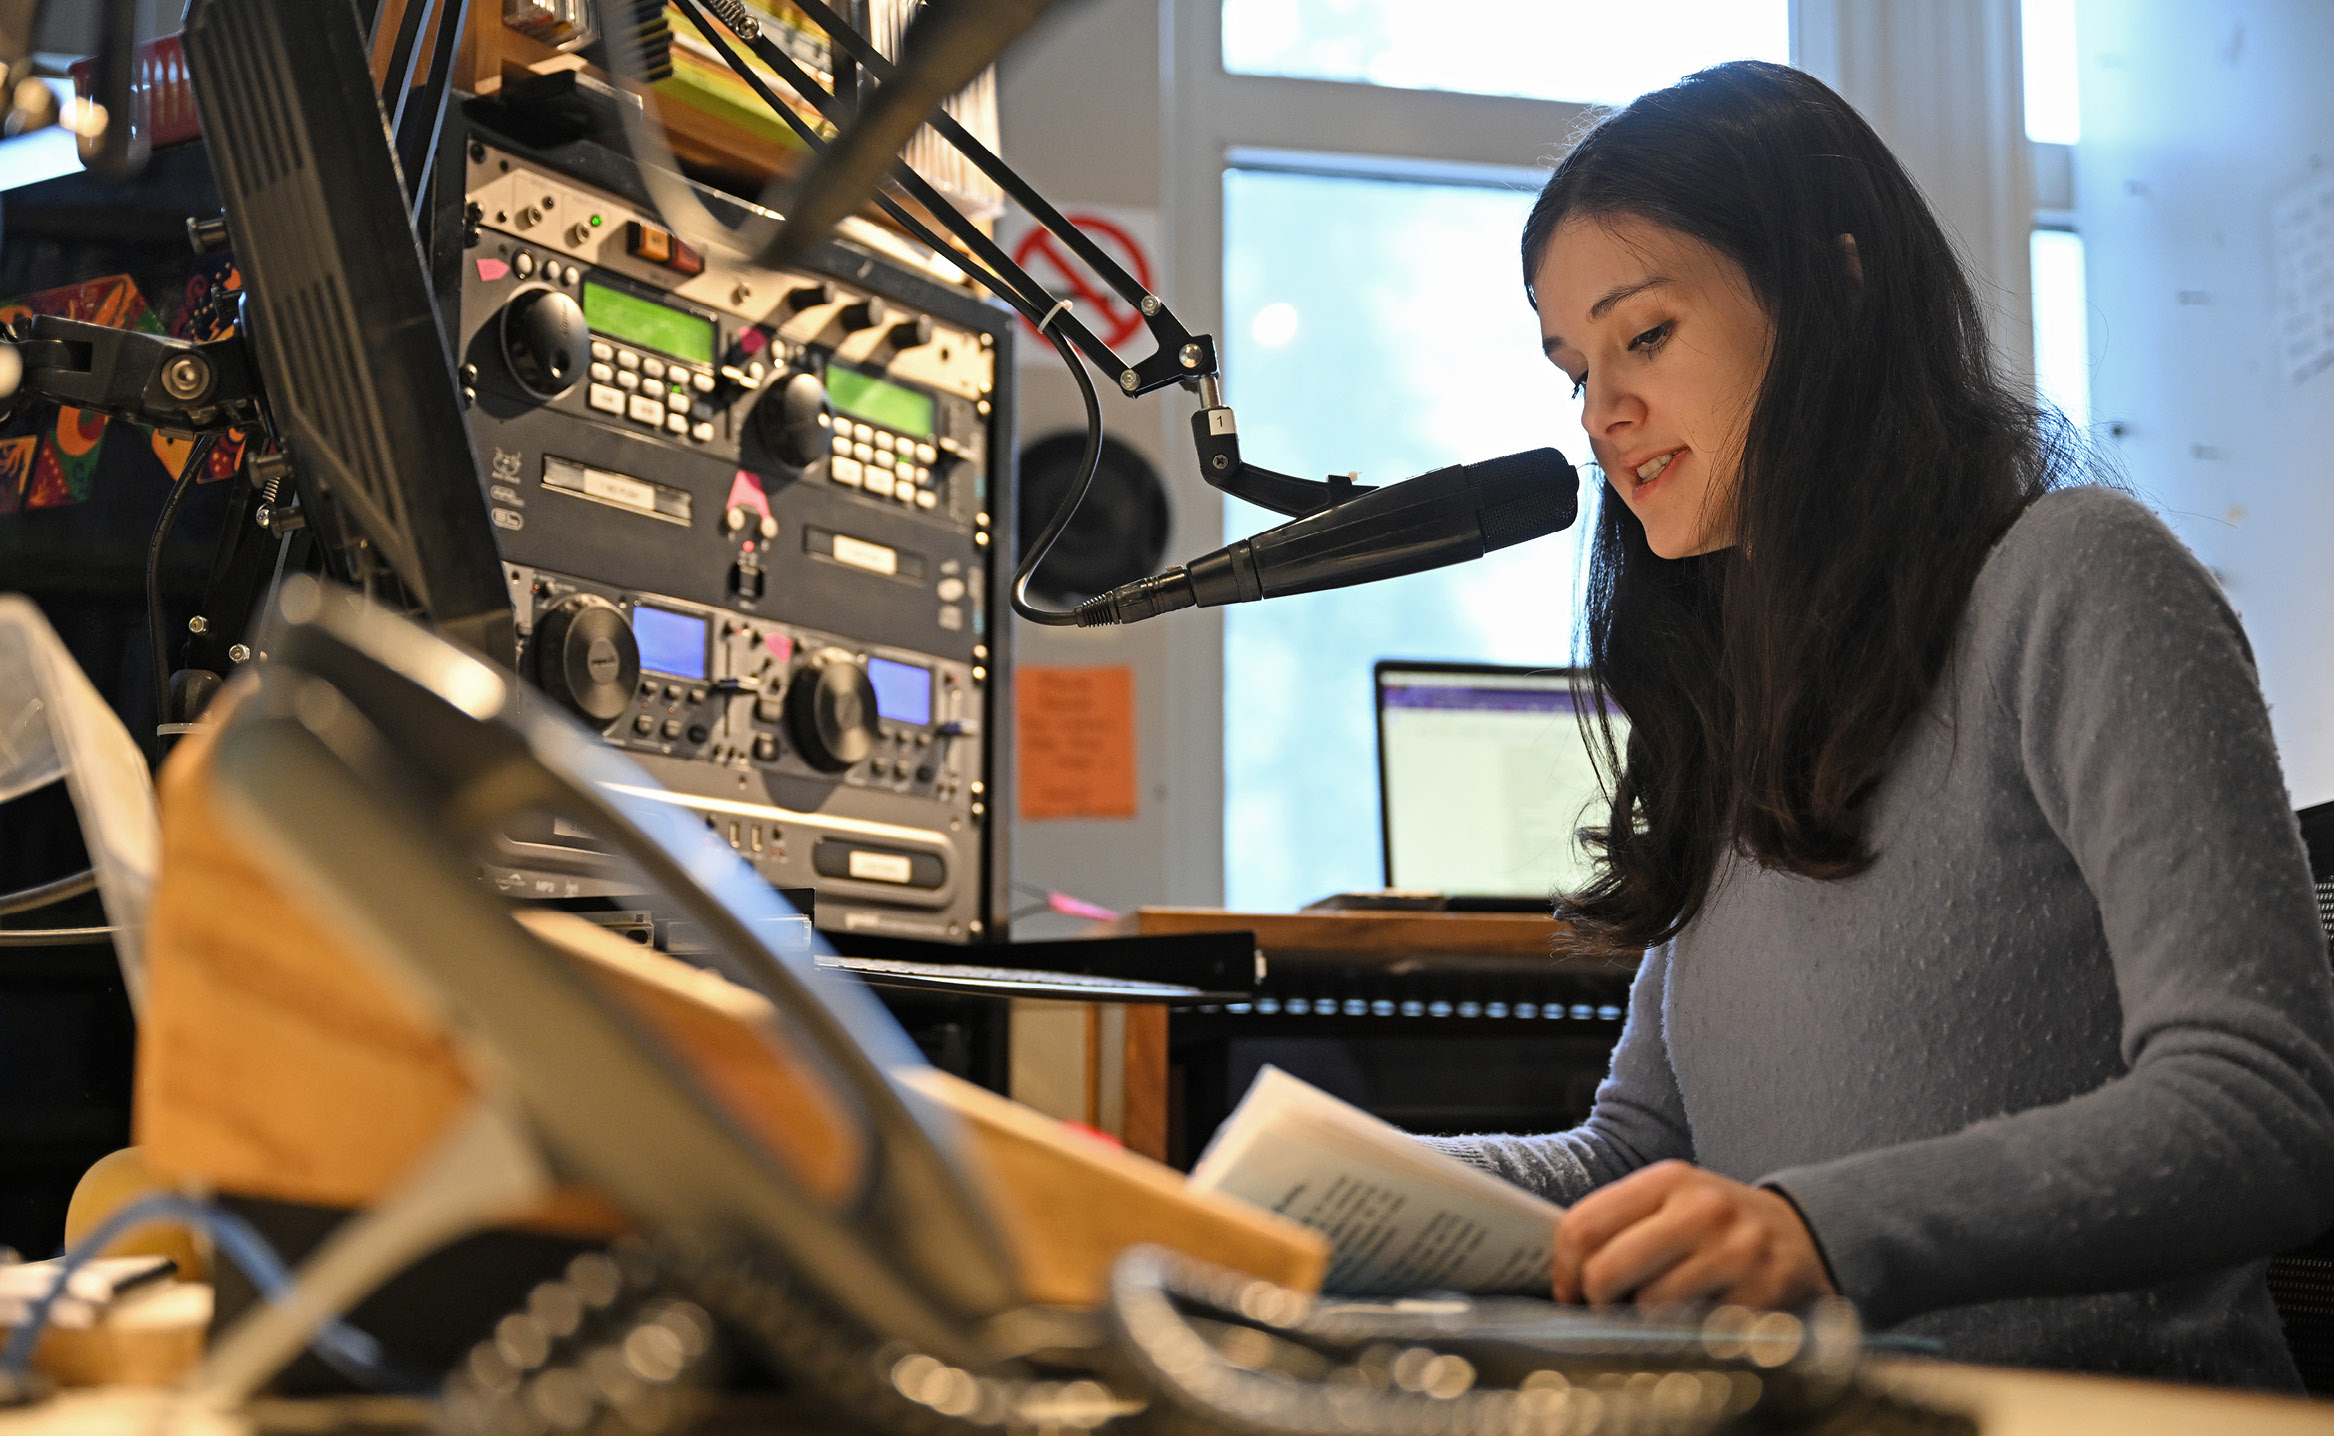 Riley Madden ’26 broadcasts her weekly radio show, “Pirate Radio” from the studios at WCNI.